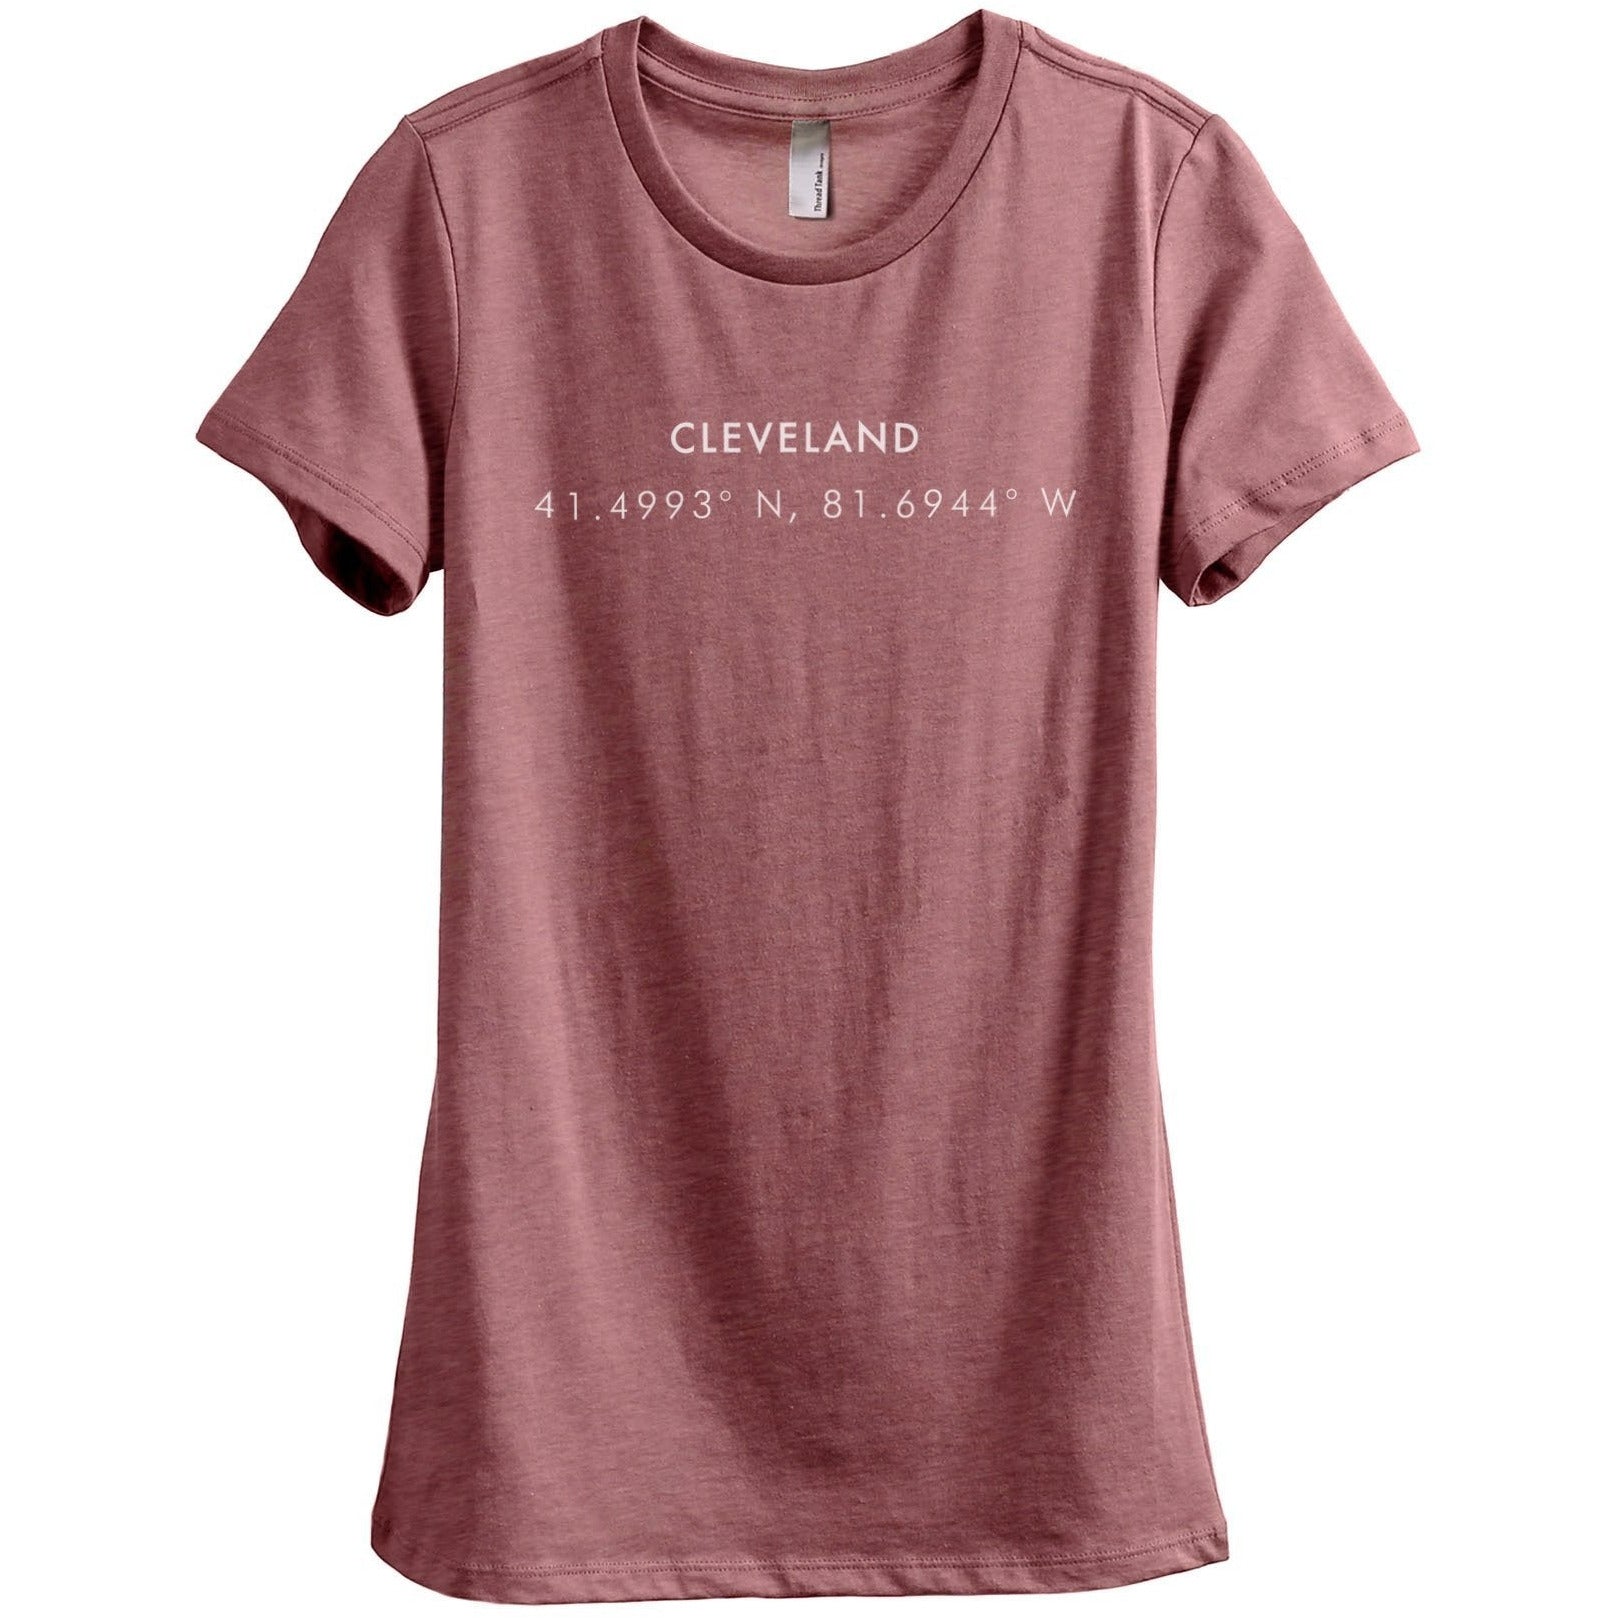 Cleveland Ohio Coordinates Women's Relaxed Crewneck T-Shirt Top Tee Heather Rouge